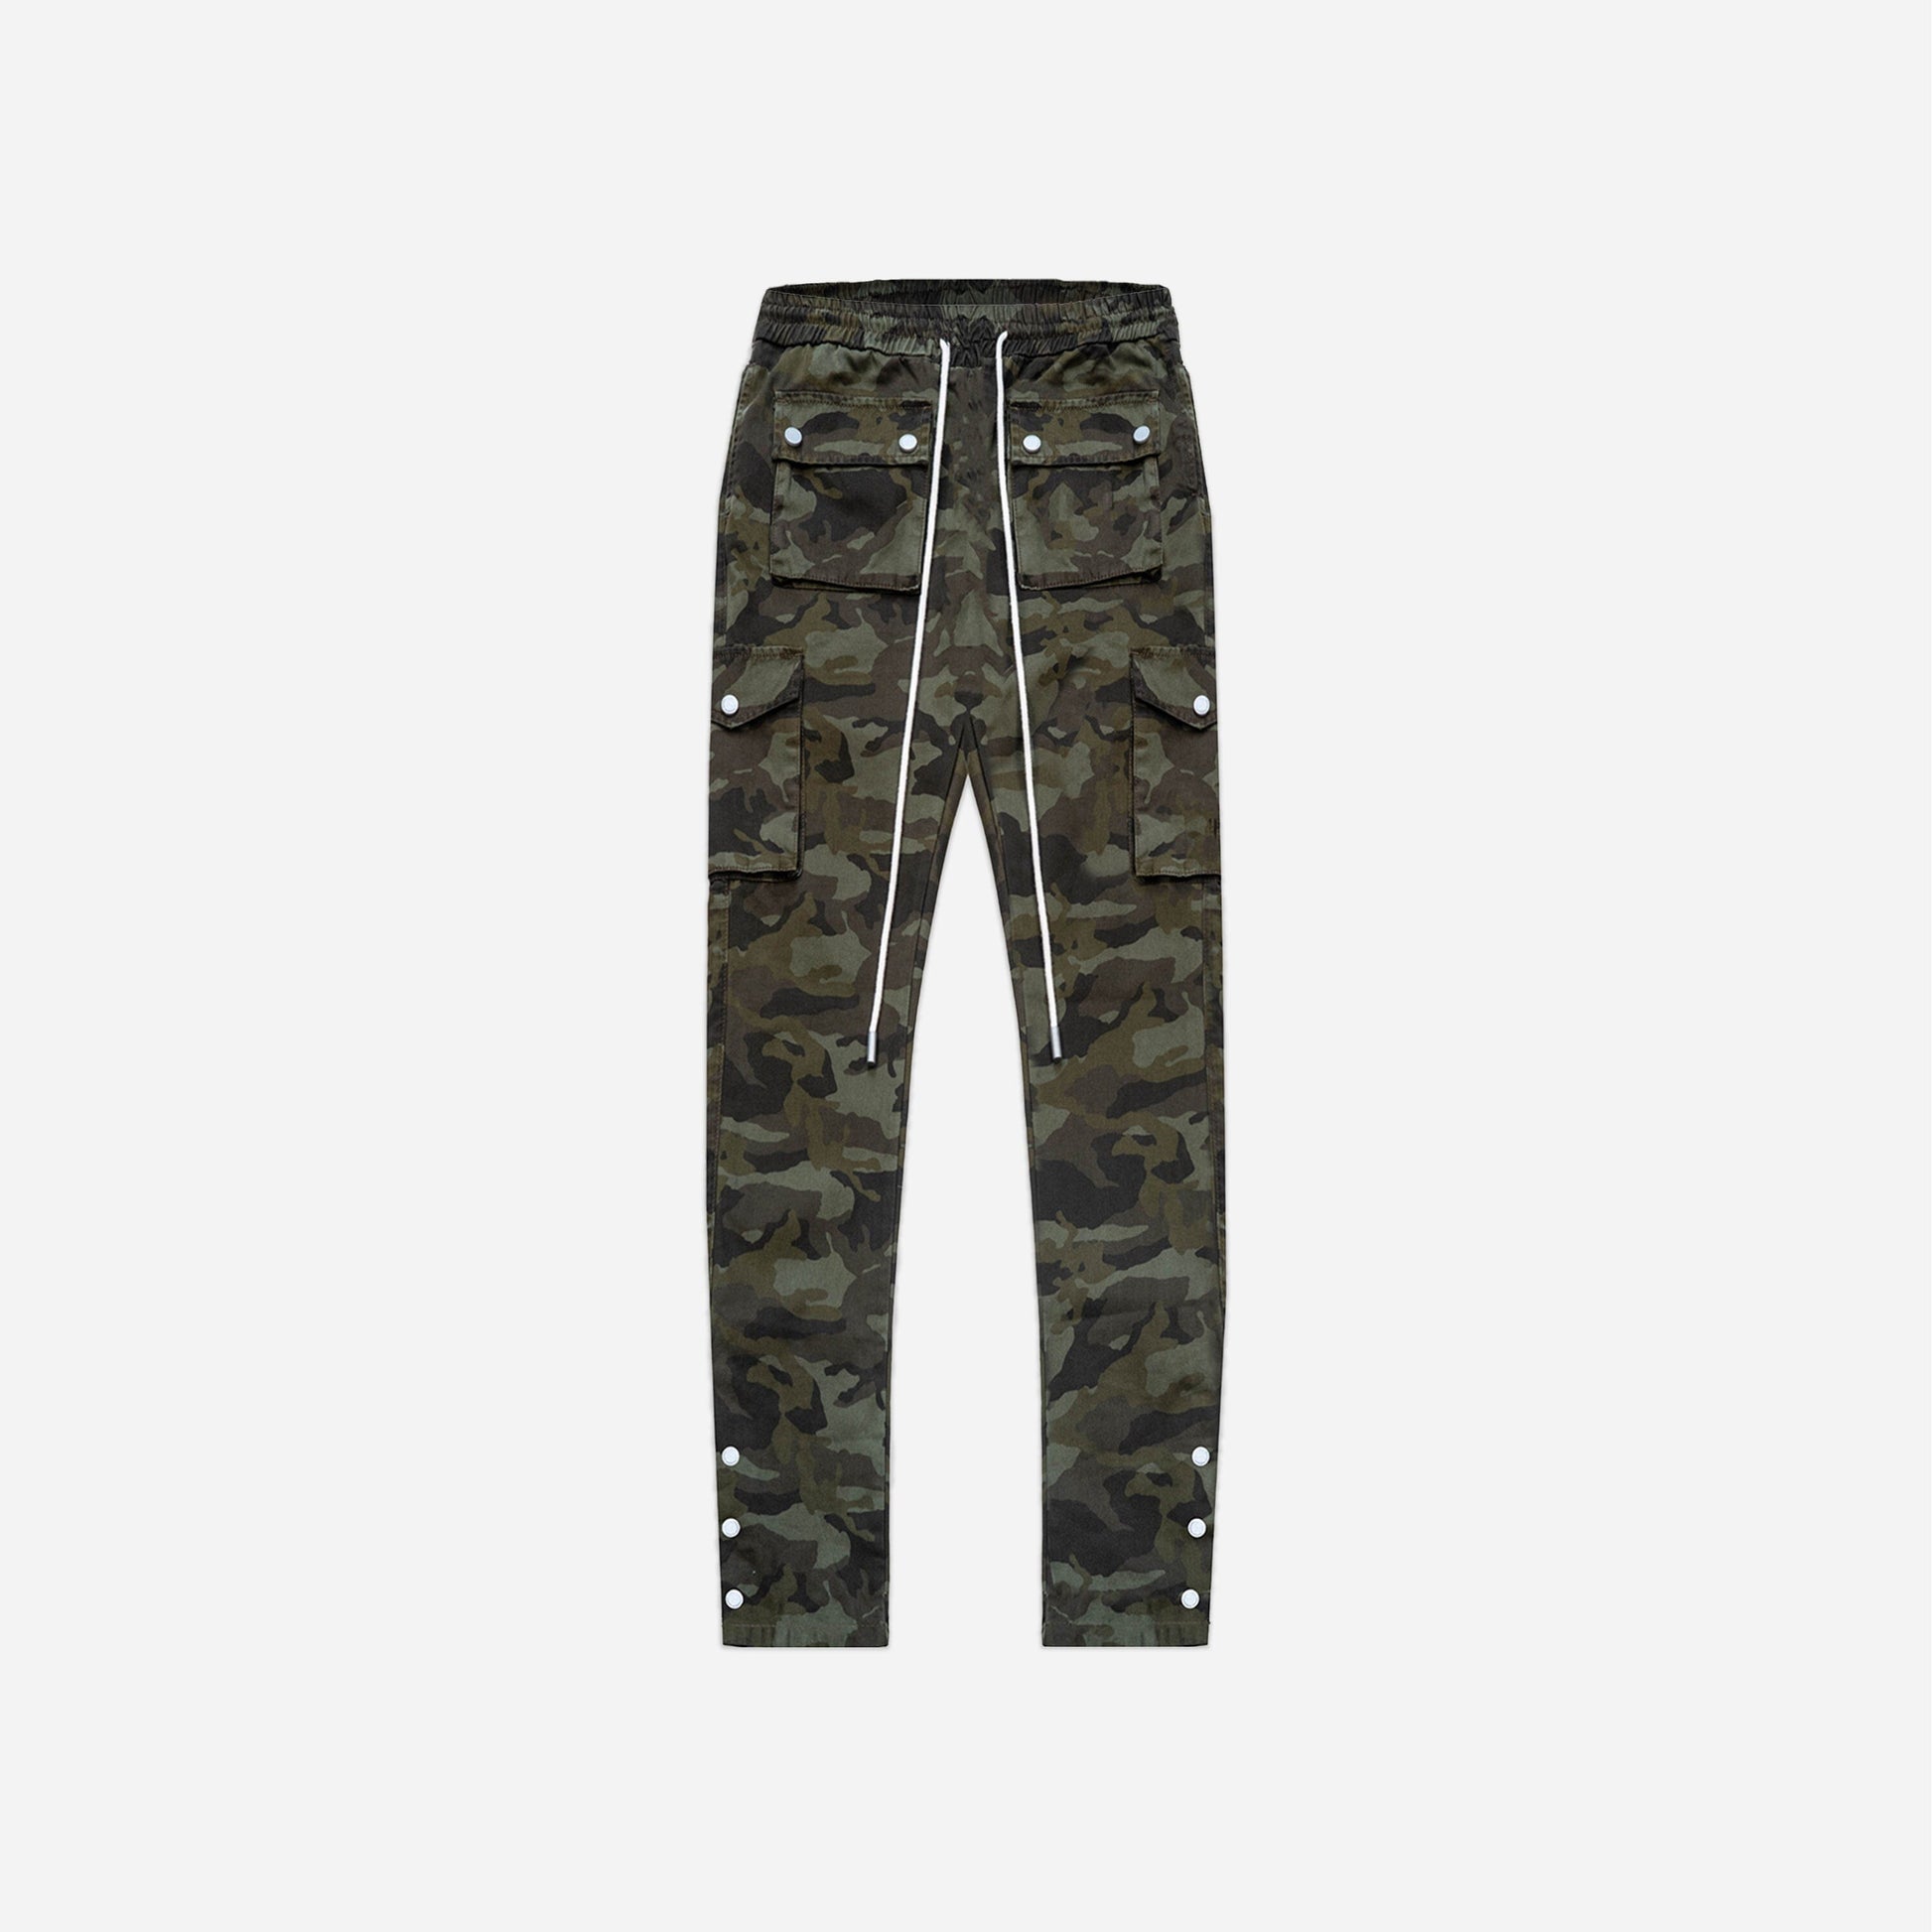 Buttons Cargo Pants in Camo